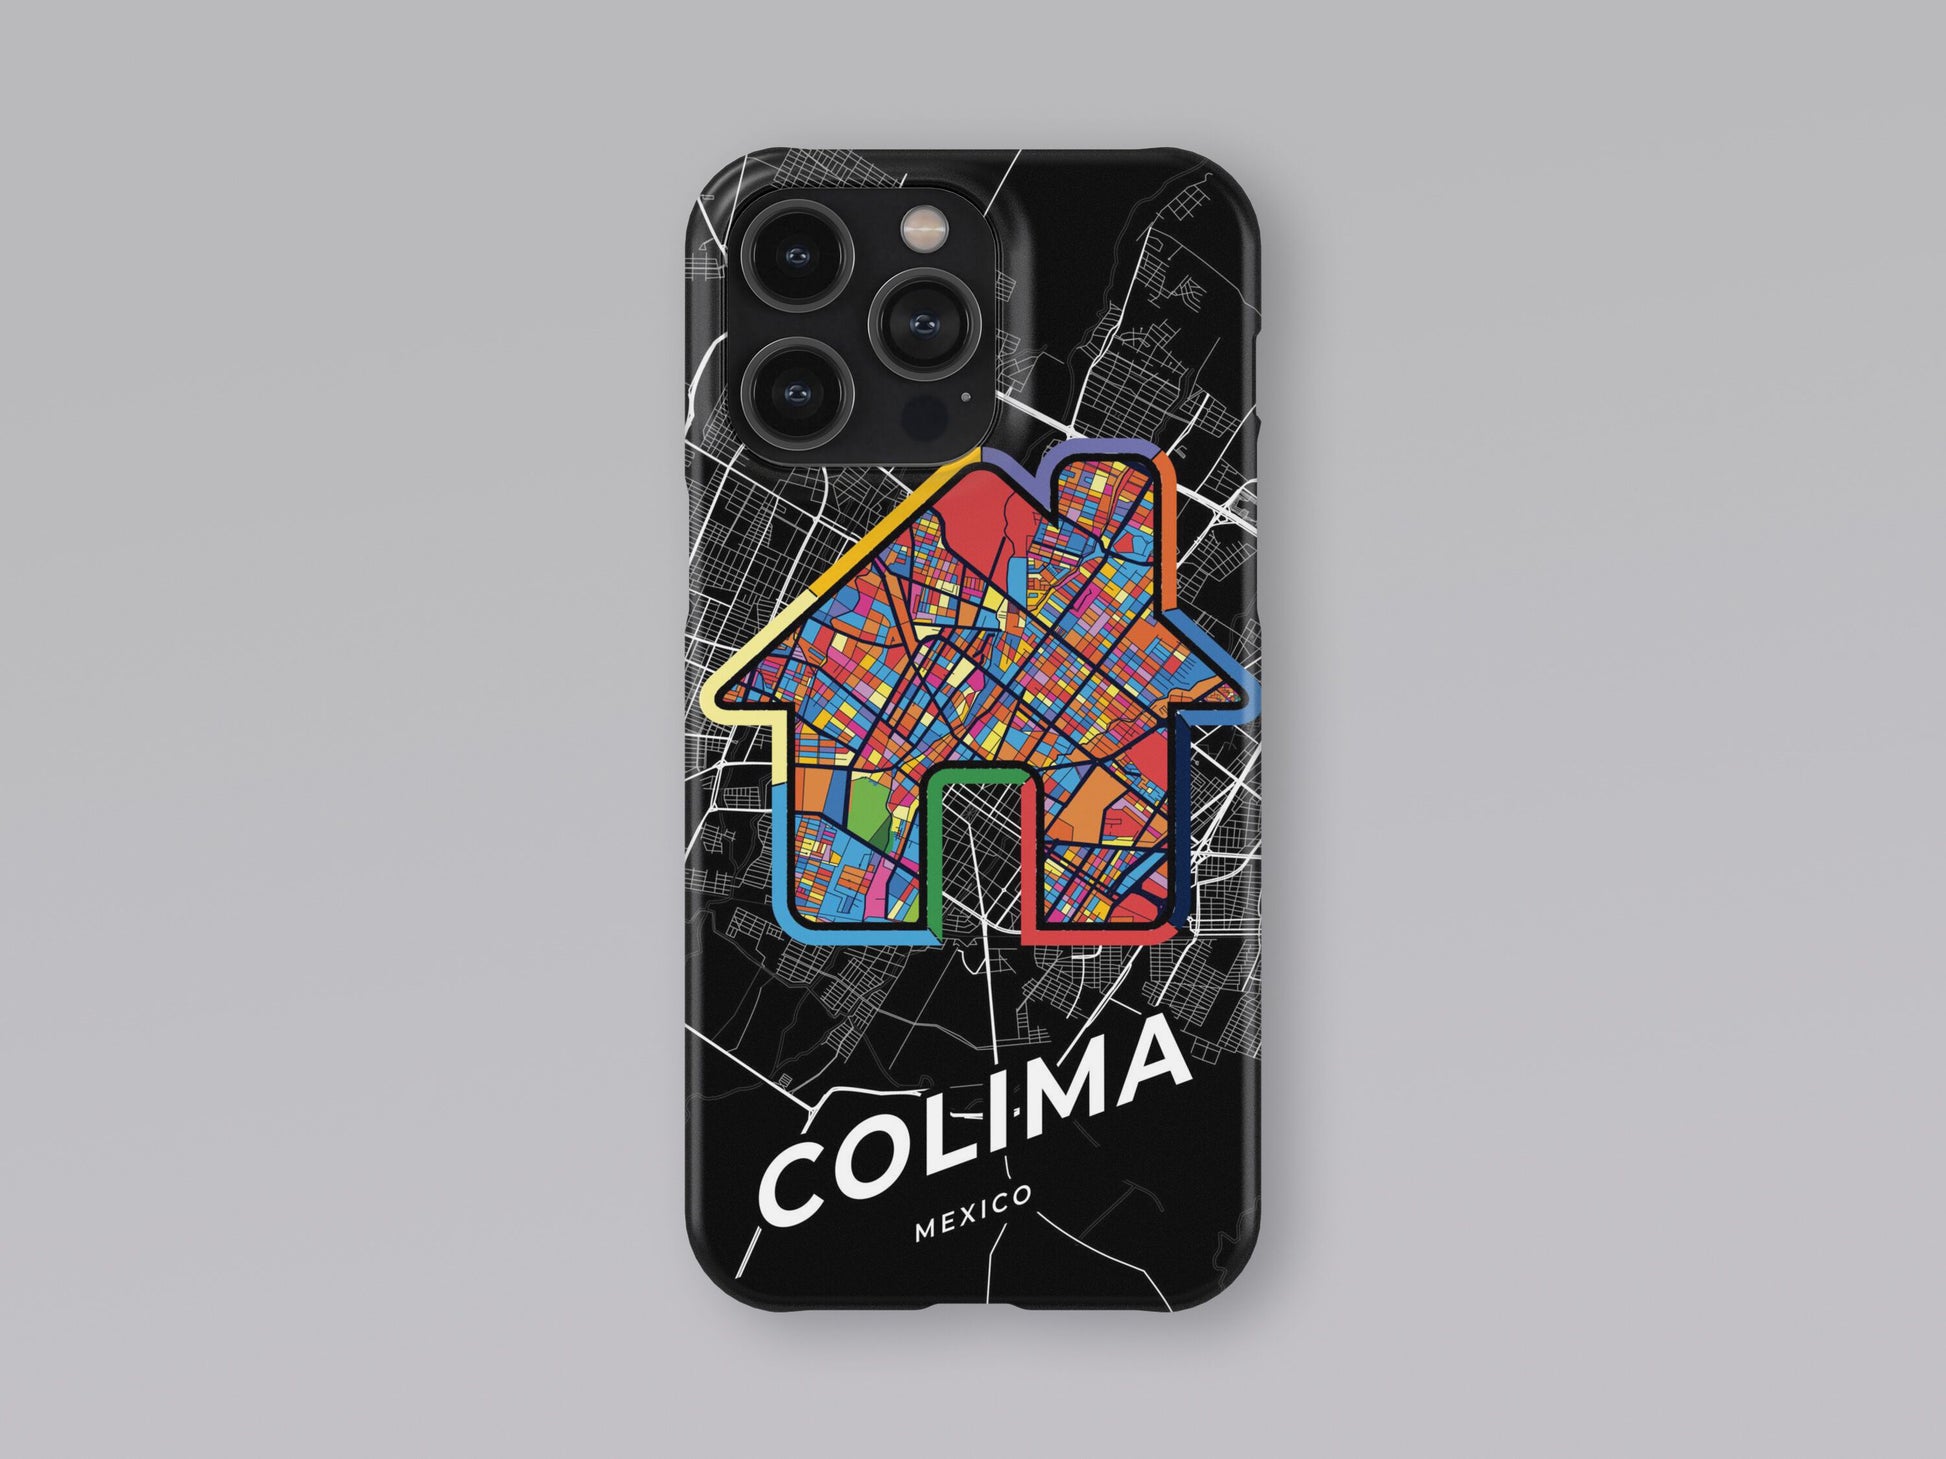 Colima Mexico slim phone case with colorful icon. Birthday, wedding or housewarming gift. Couple match cases. 3